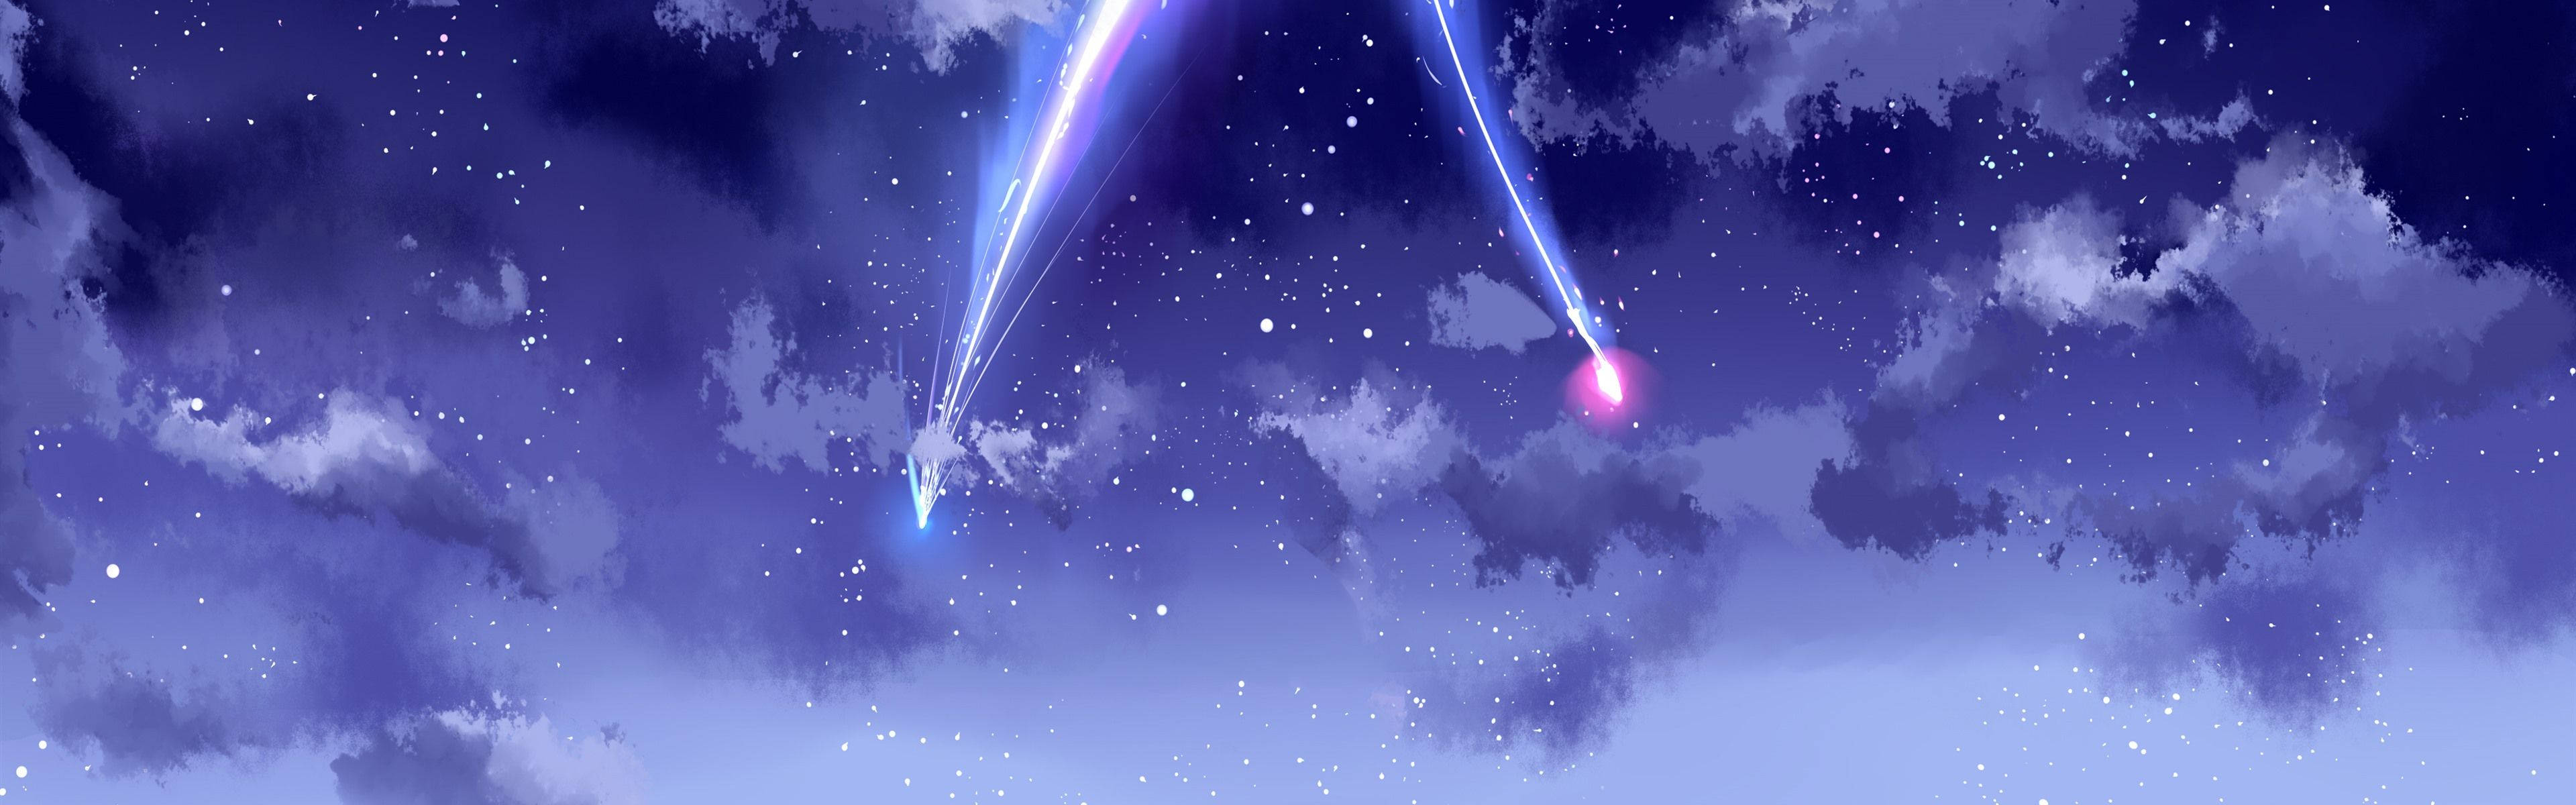 Animation Two Shooting Stars In Sky Wallpaper